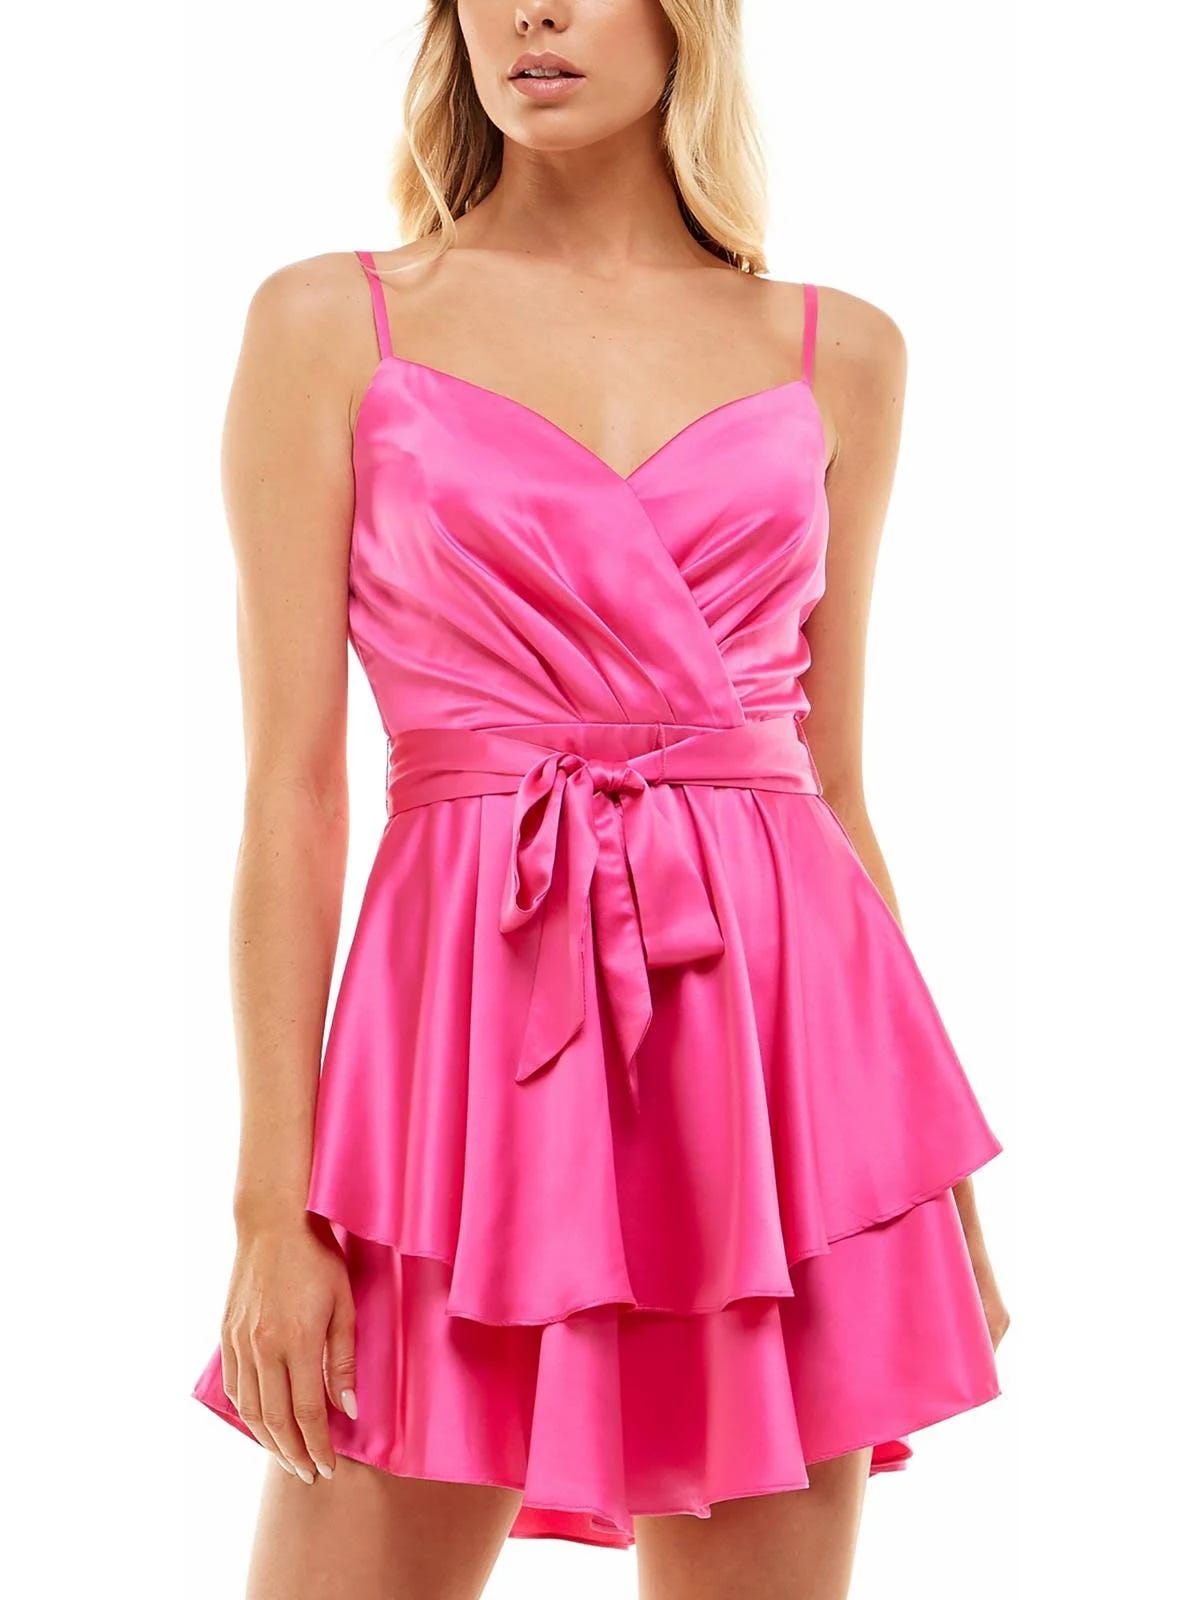 Neon Pink A-Line Mini Dress for Party | Image